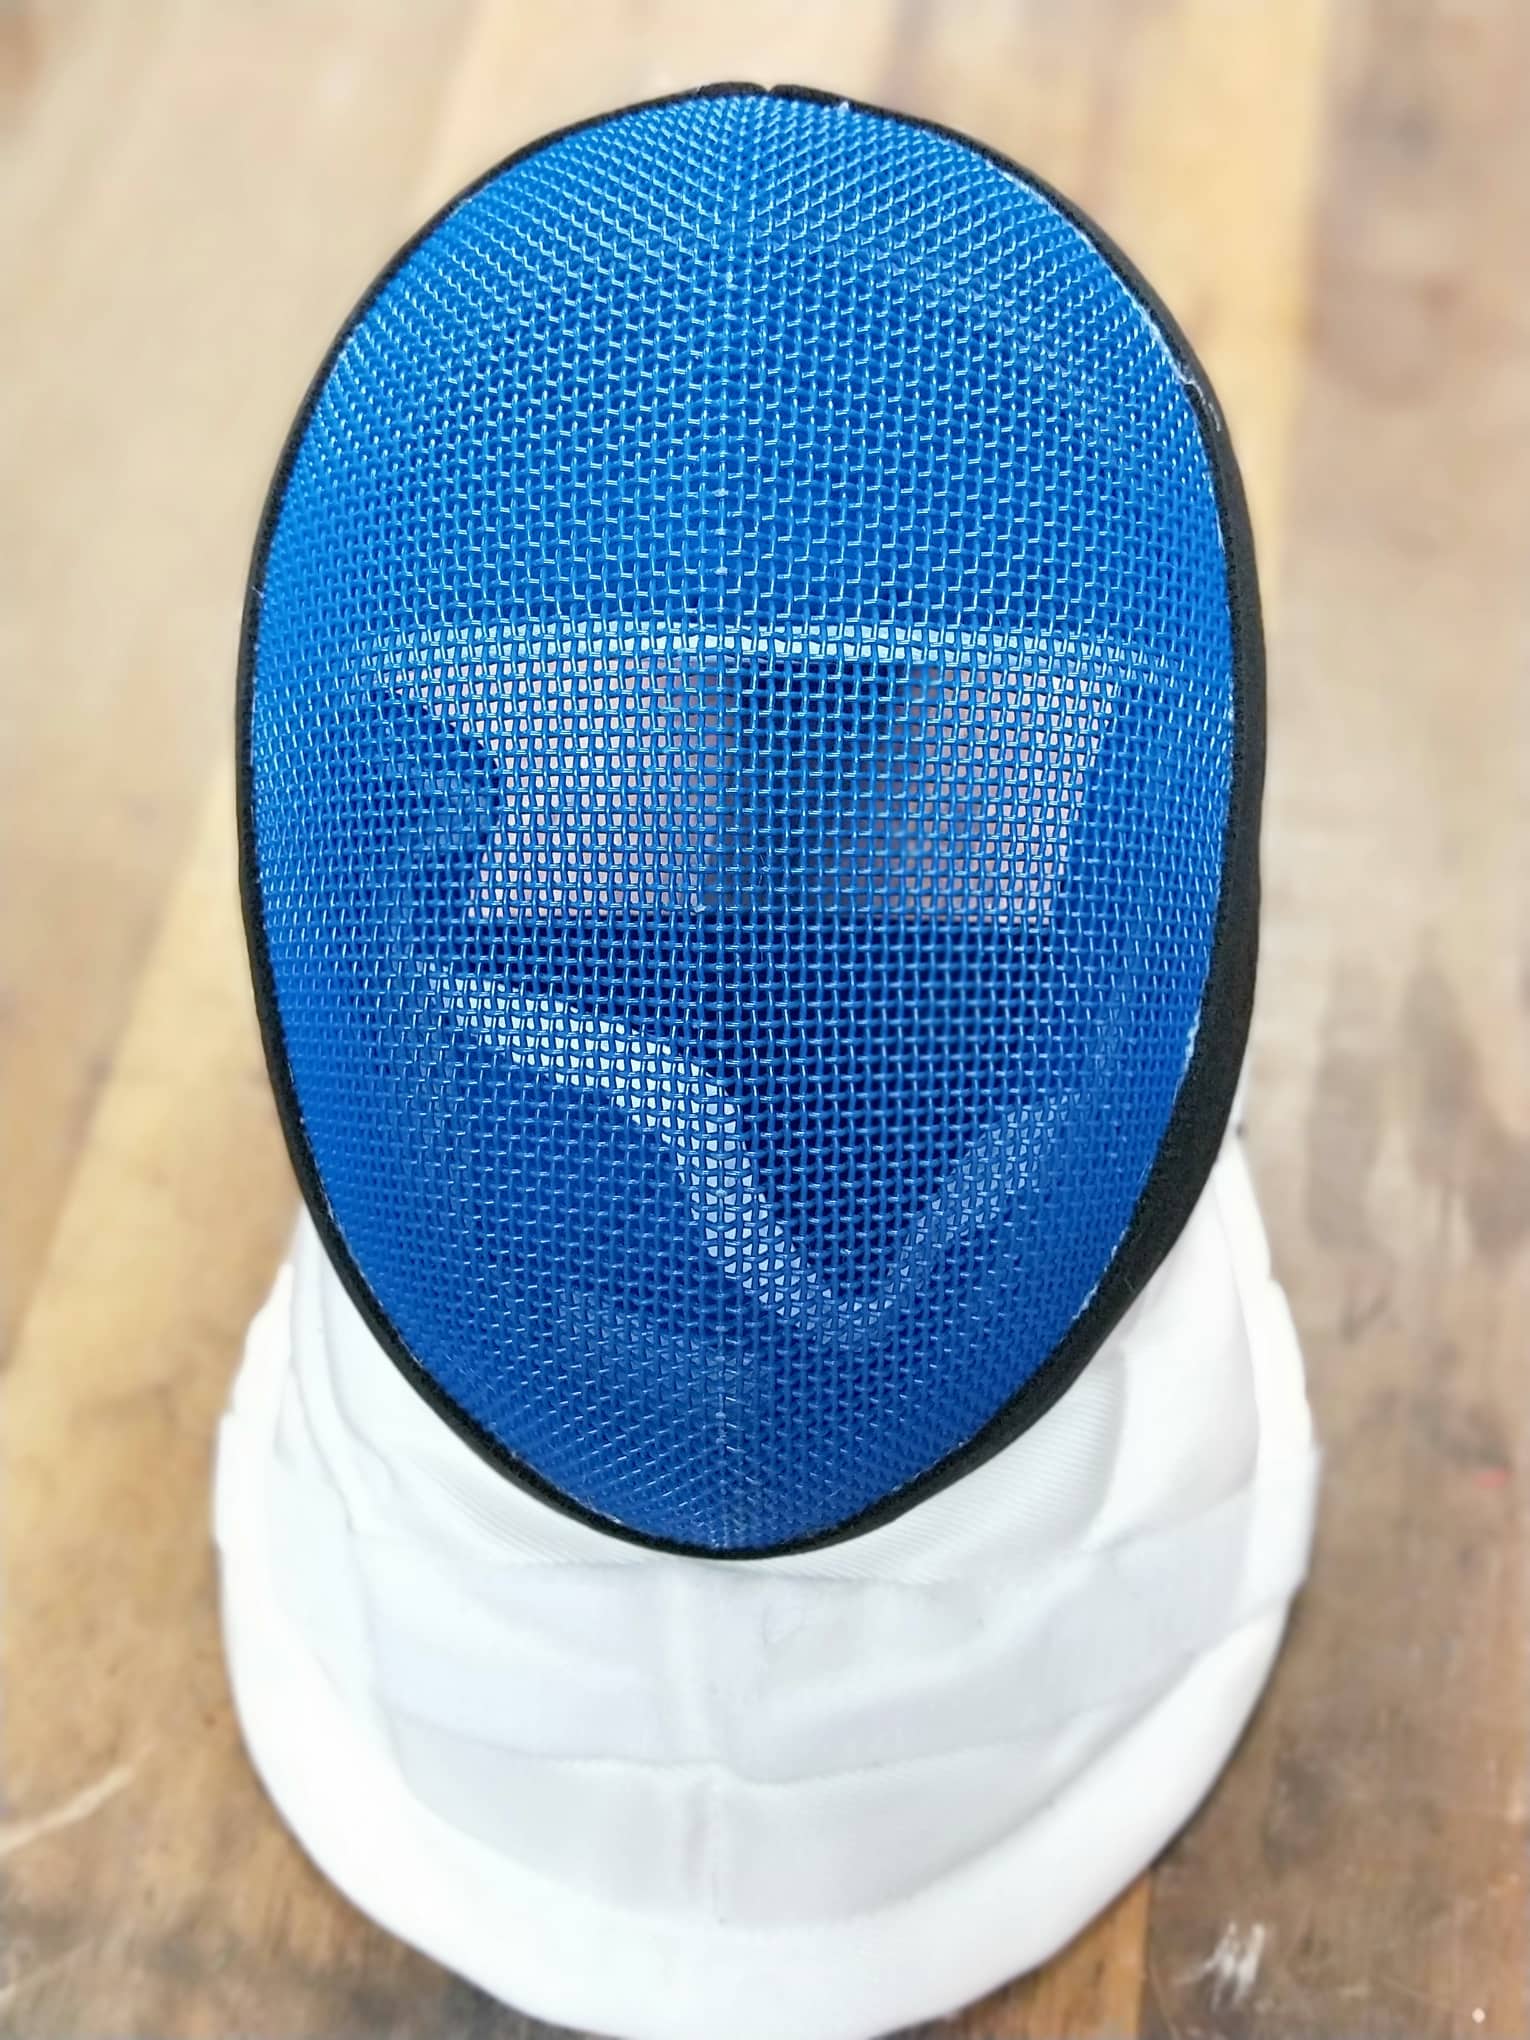 CE 350N Fencing Mask with detachable lining